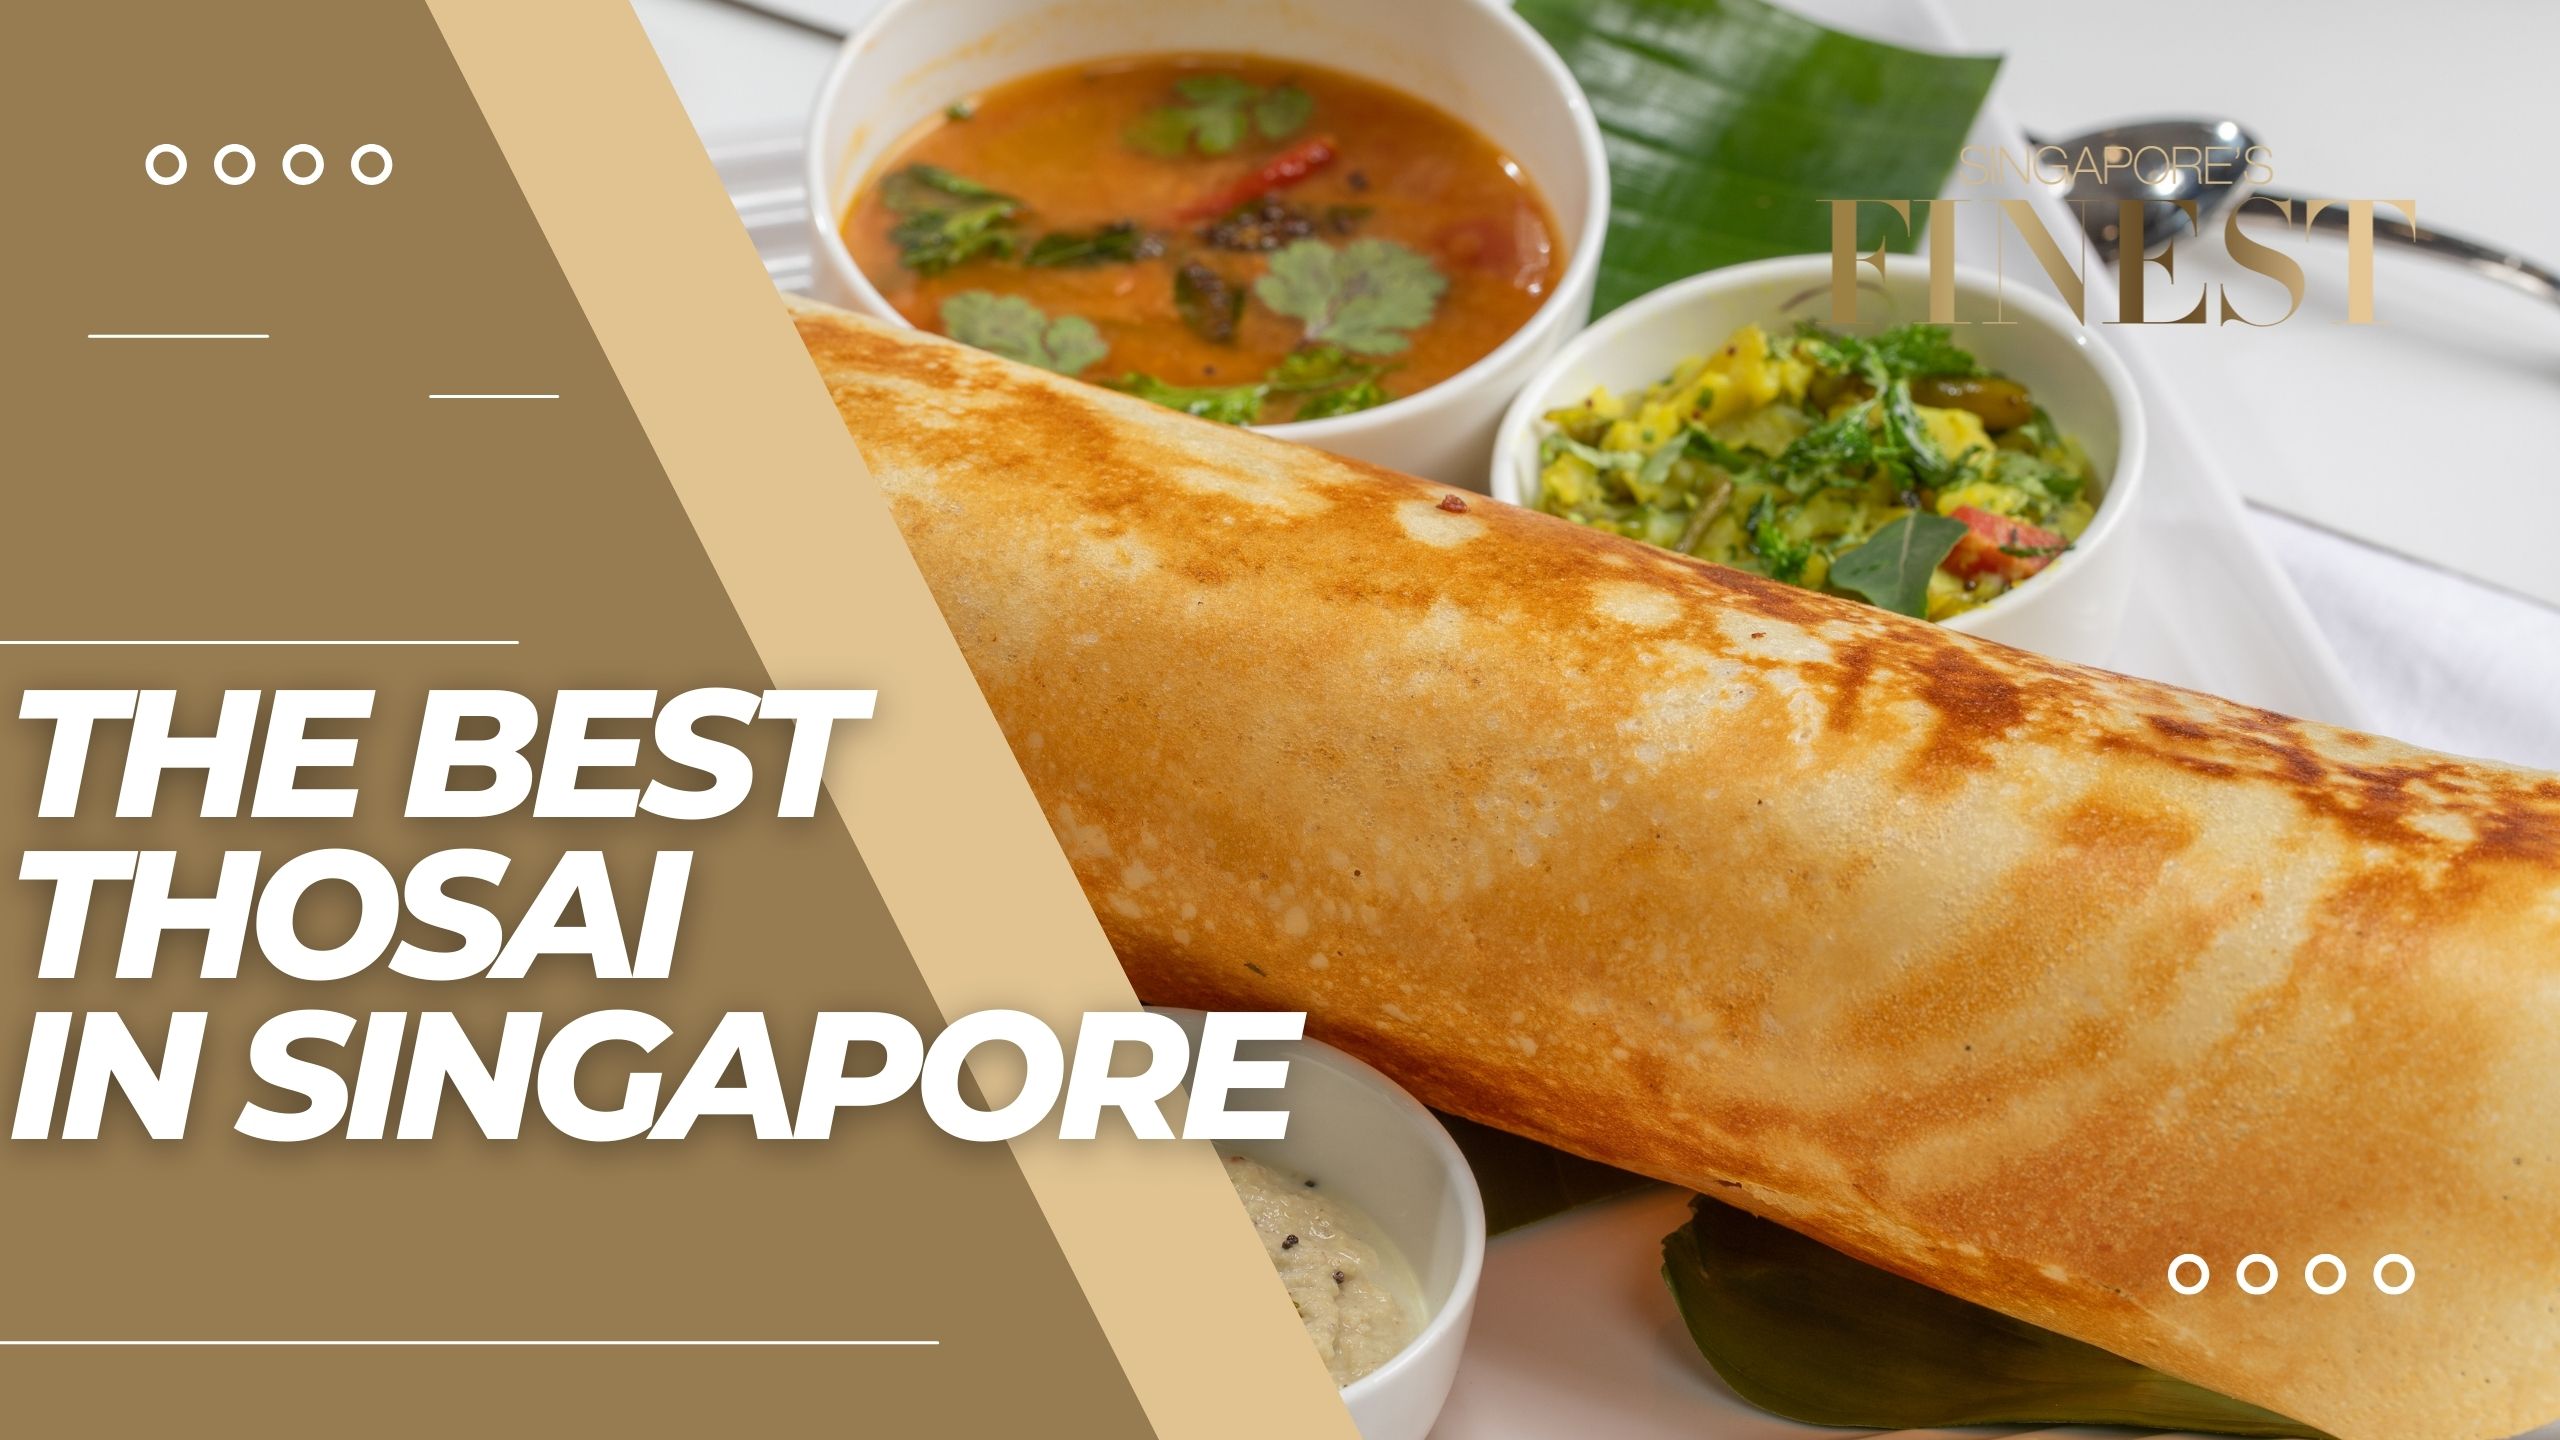 The Finest Thosai in Singapore